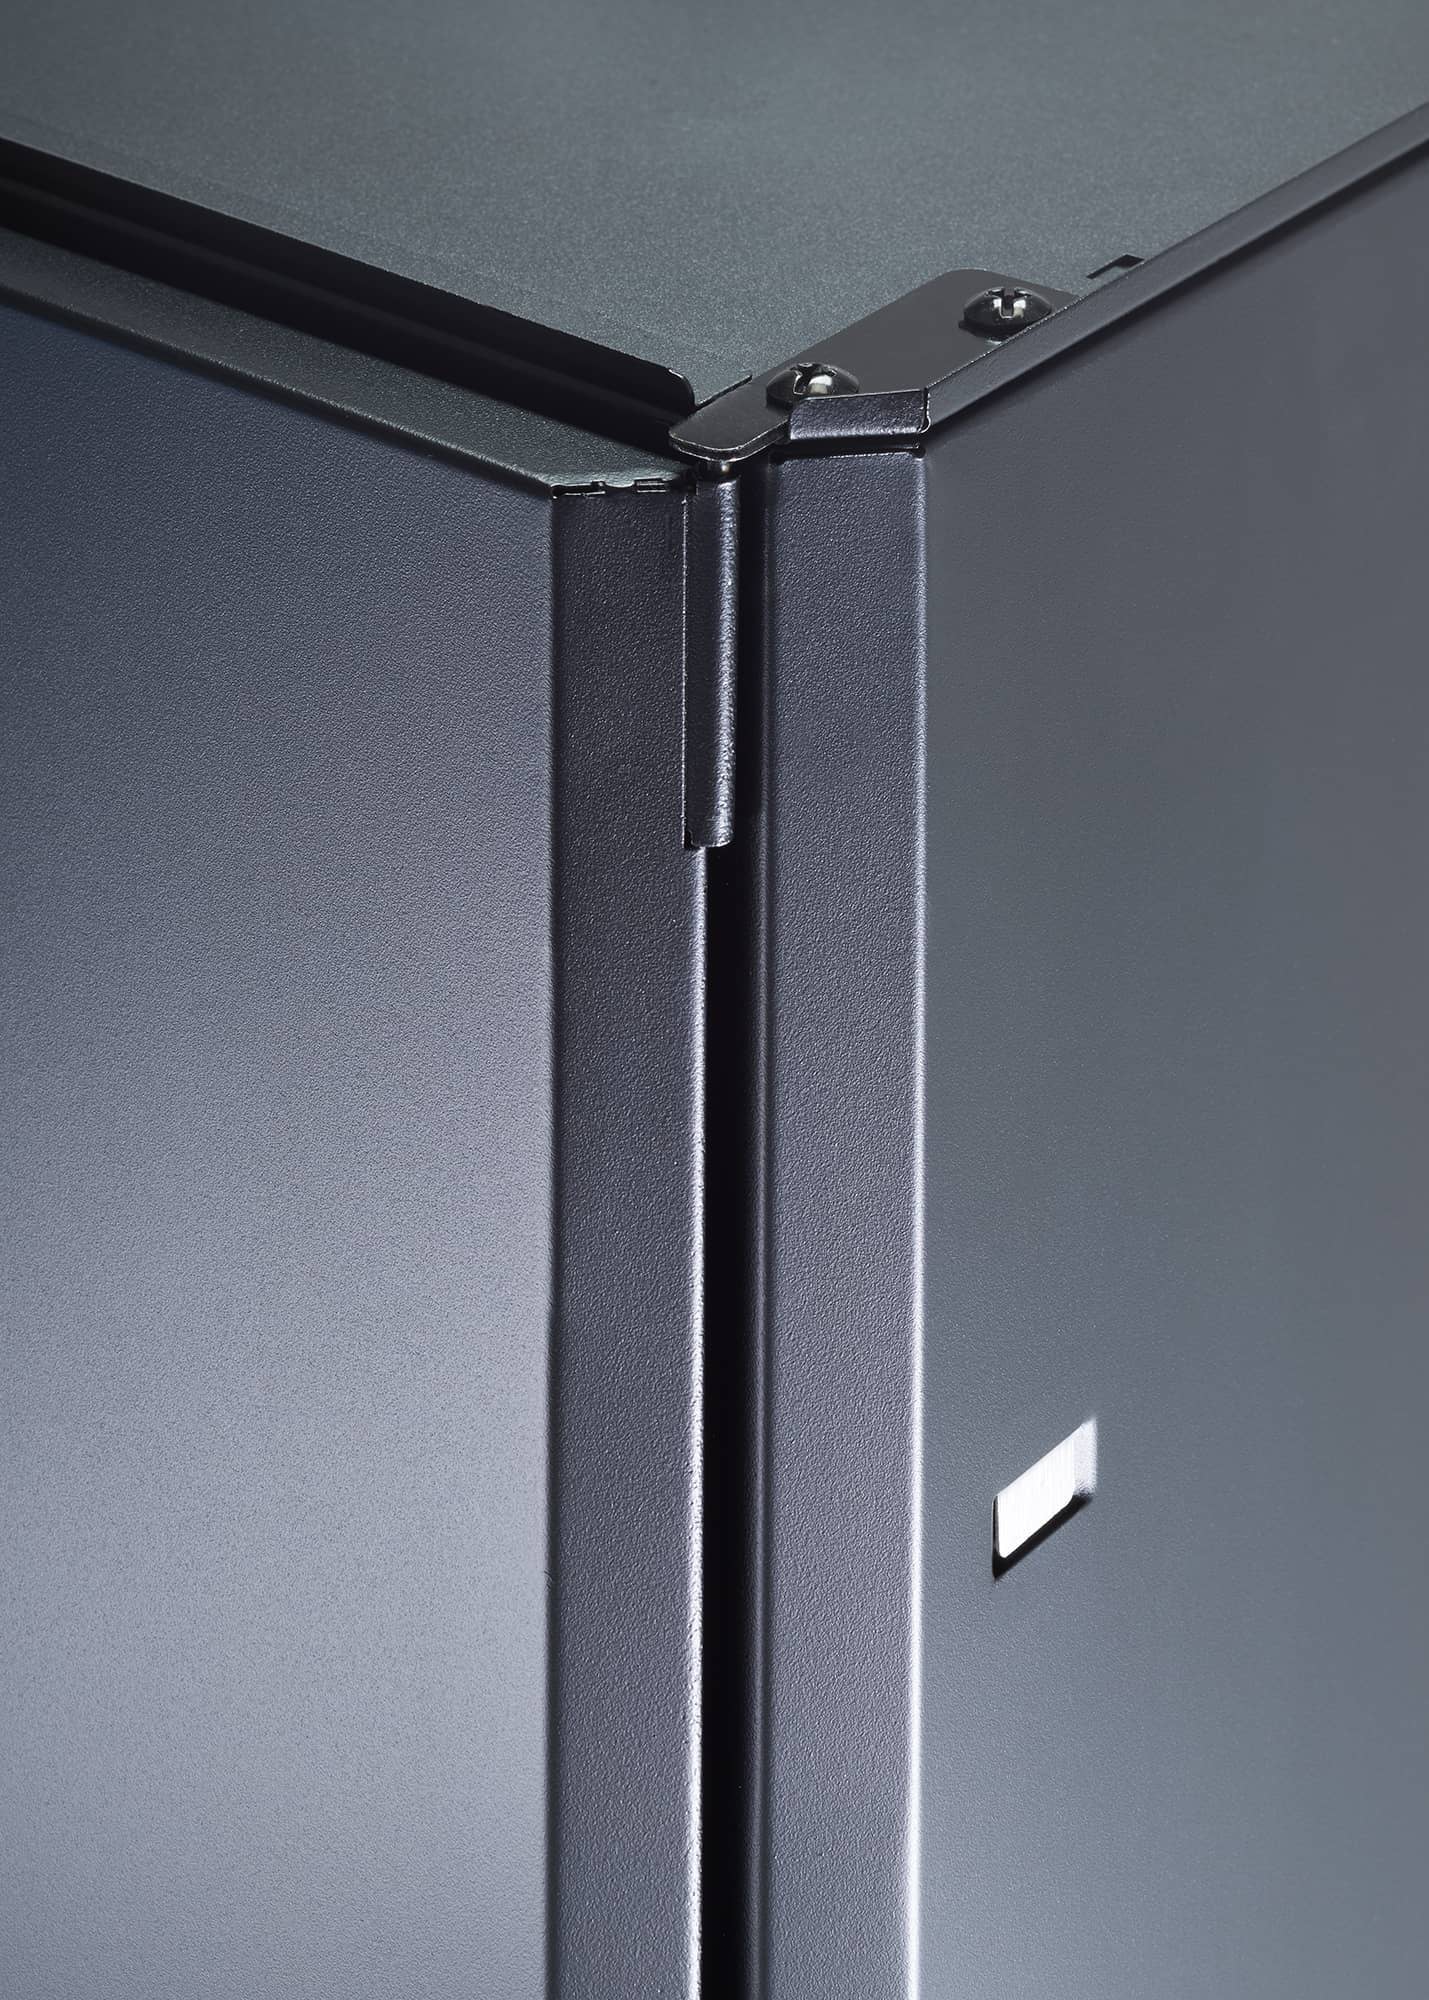 smooth edge of the cabinet